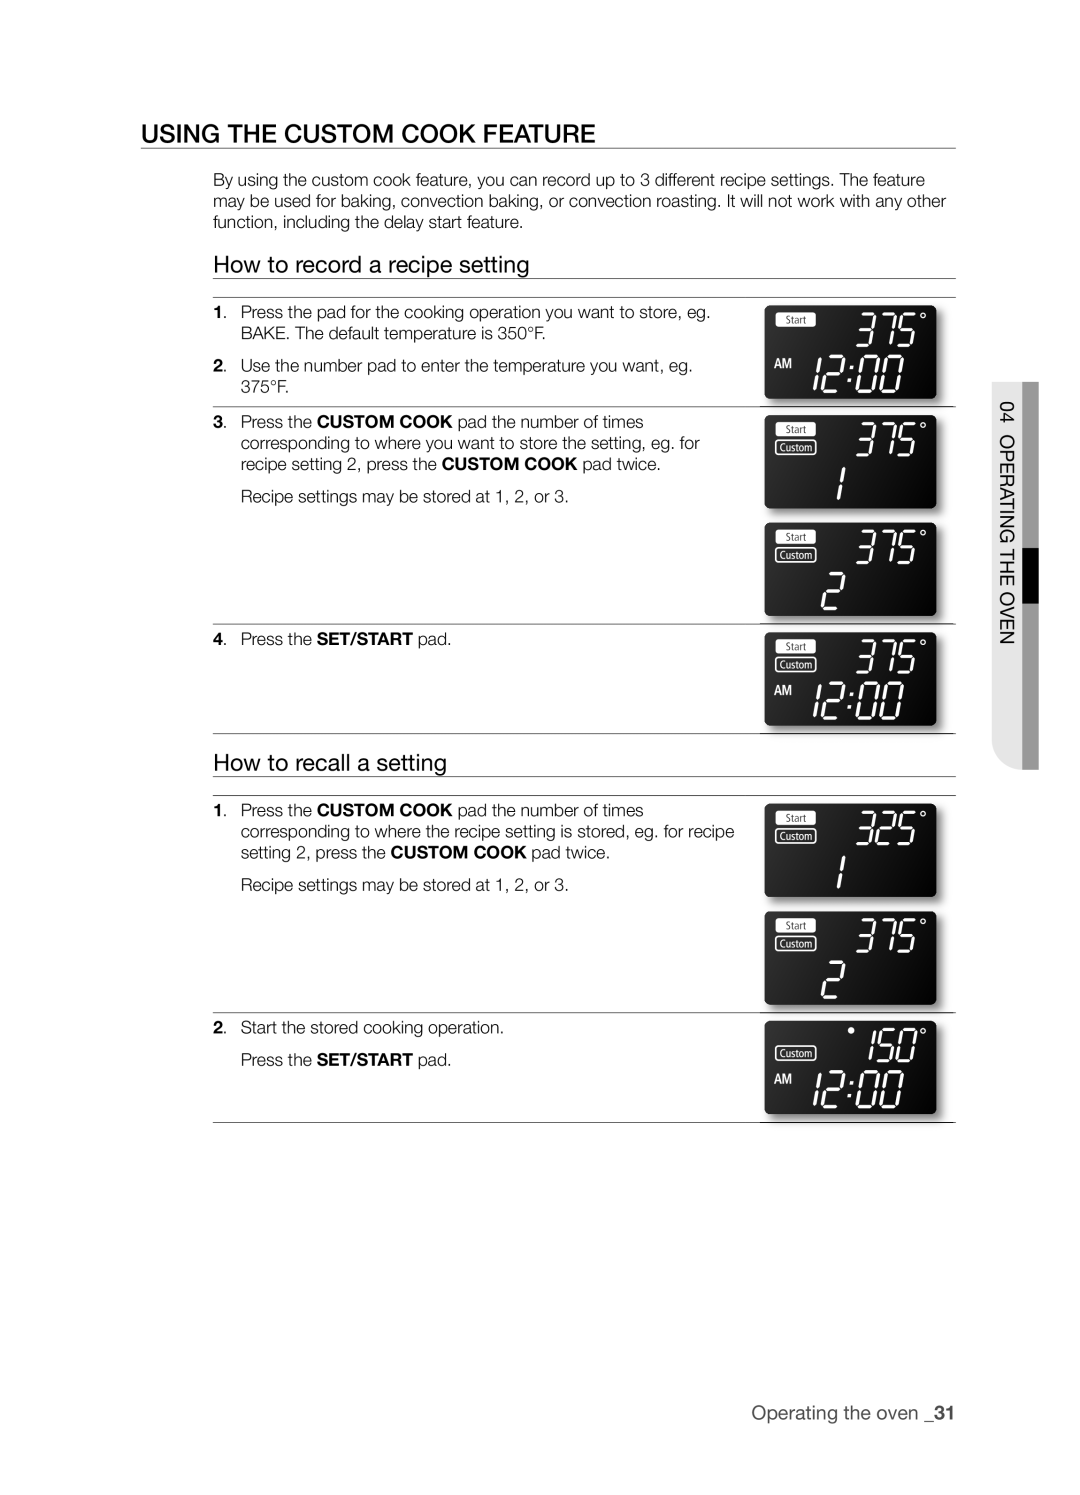 Samsung FTQ352IWX user manual Using The Custom Cook Feature, How to record a recipe setting, How to recall a setting 